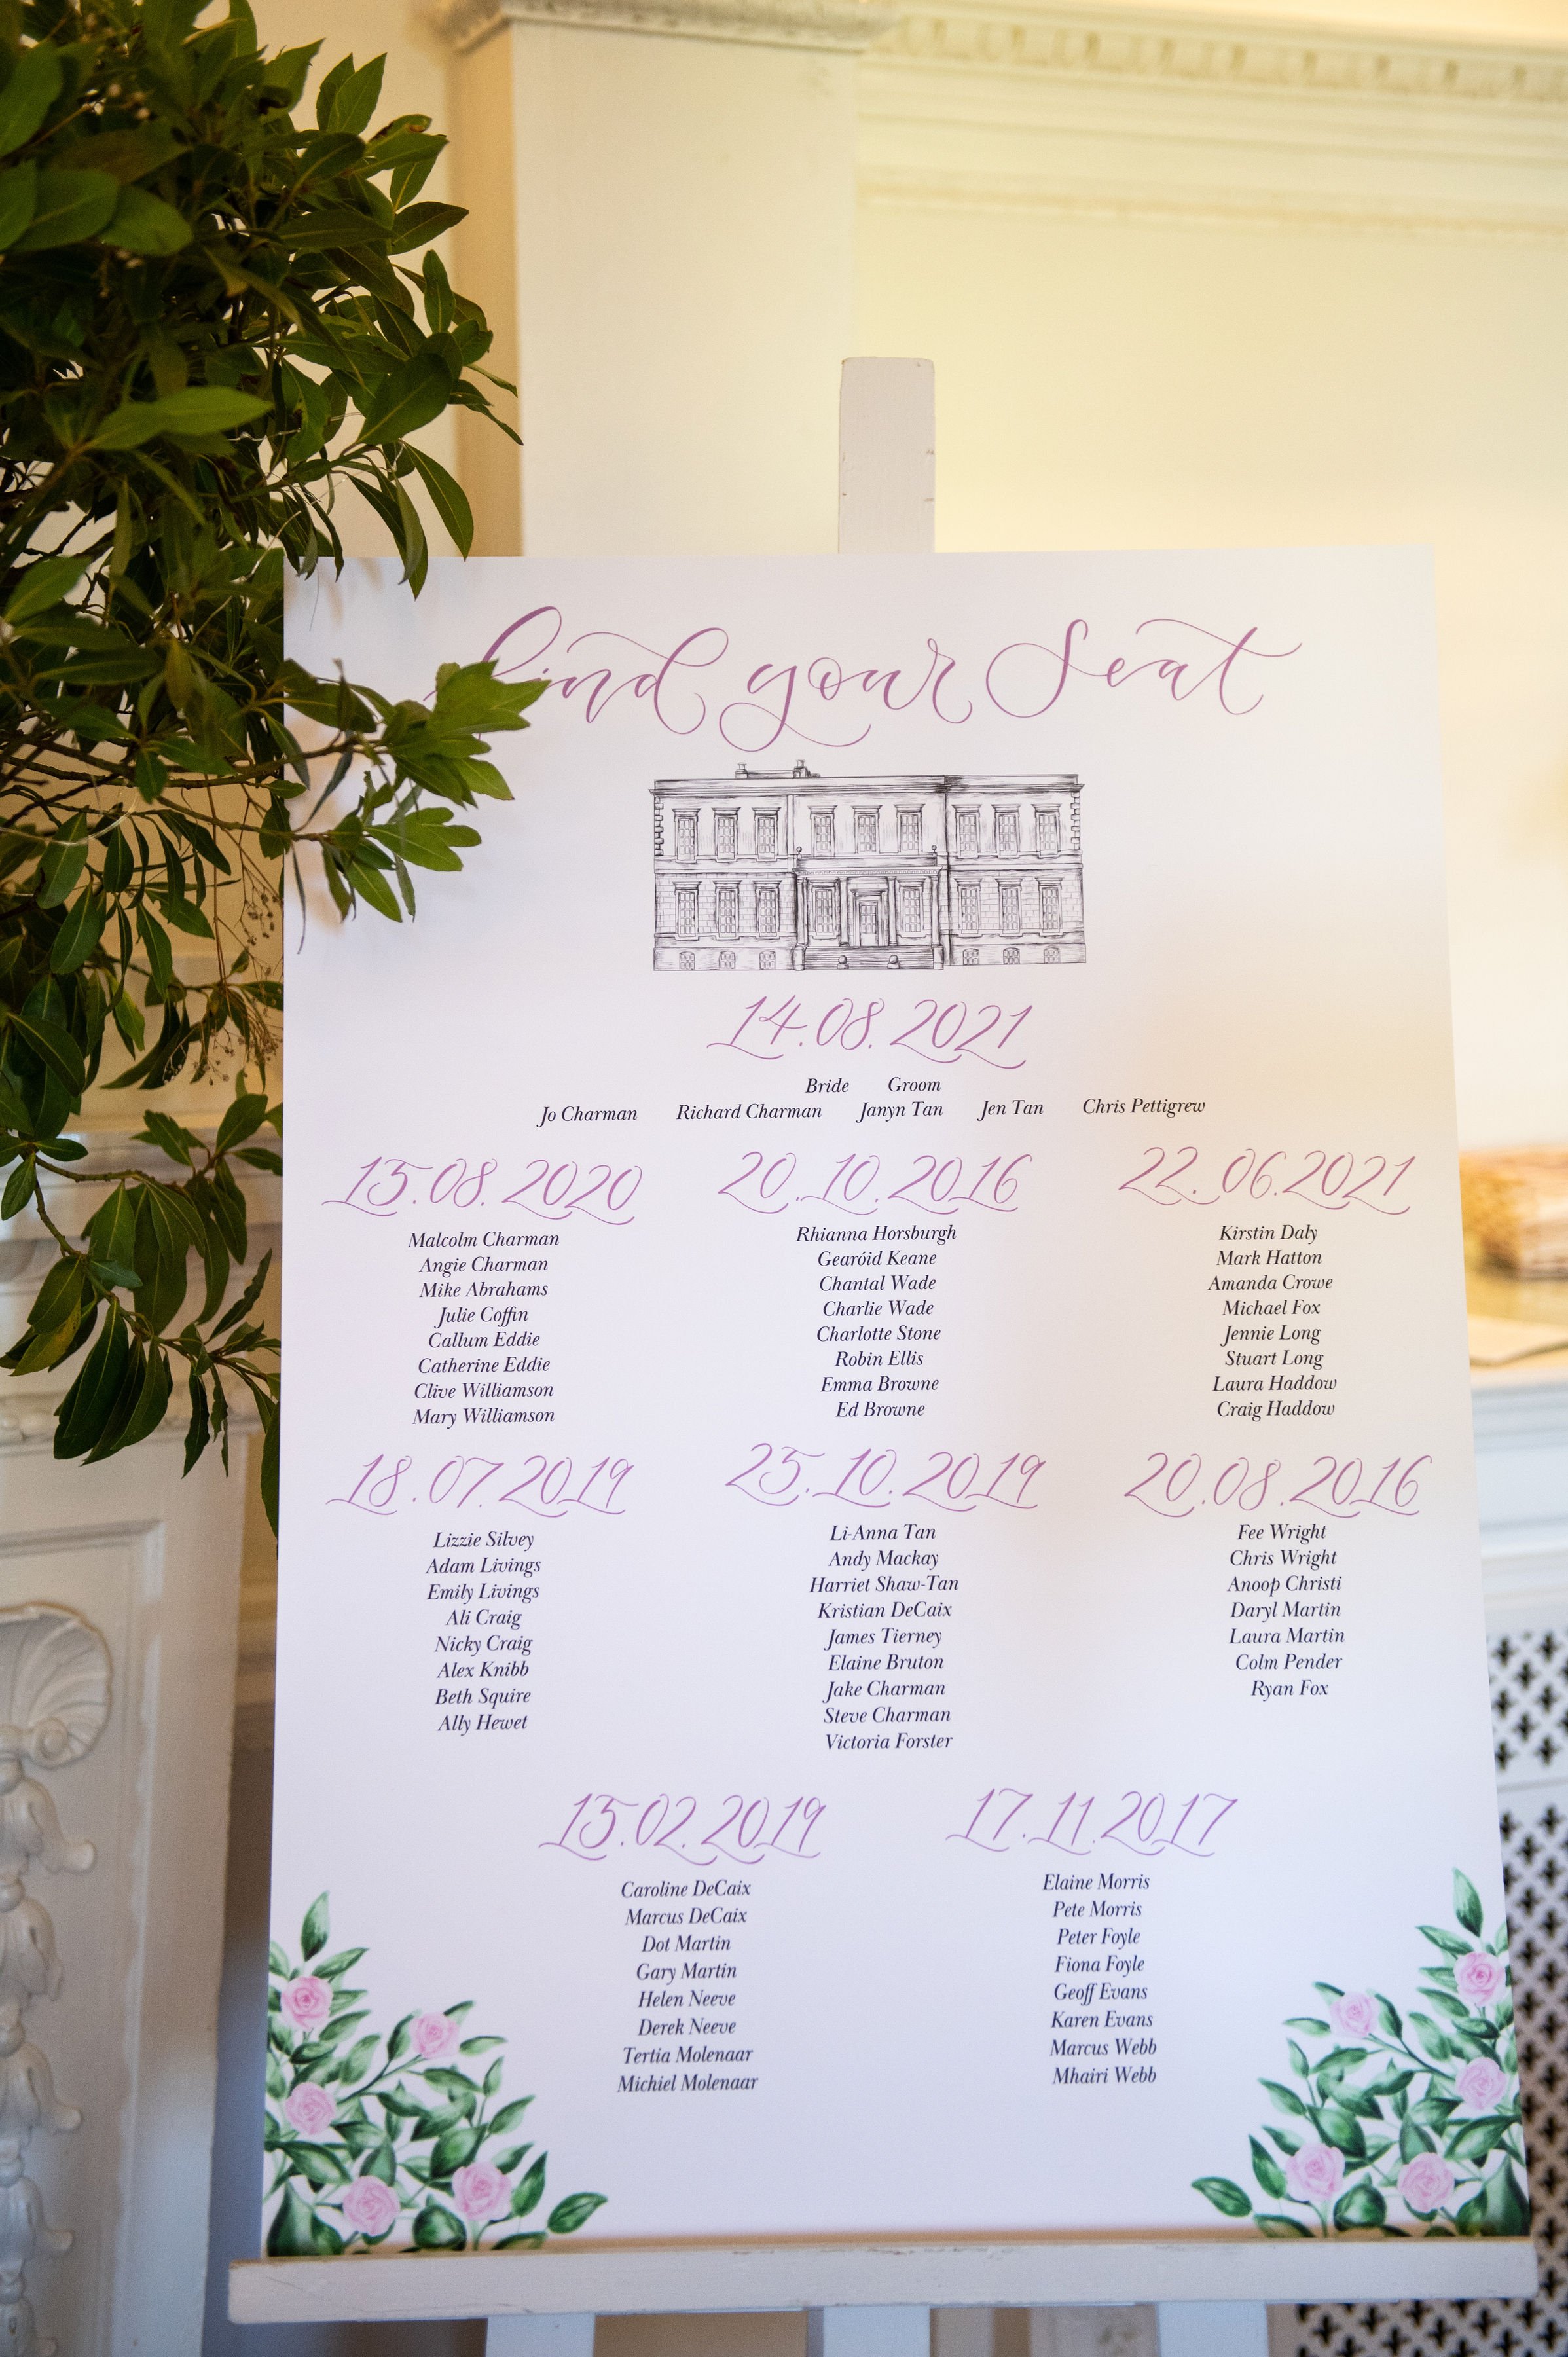 Buxted Park wedding table plan with venue drawing of buxted park and pink roses - date themed table plan - seating chart.jpg